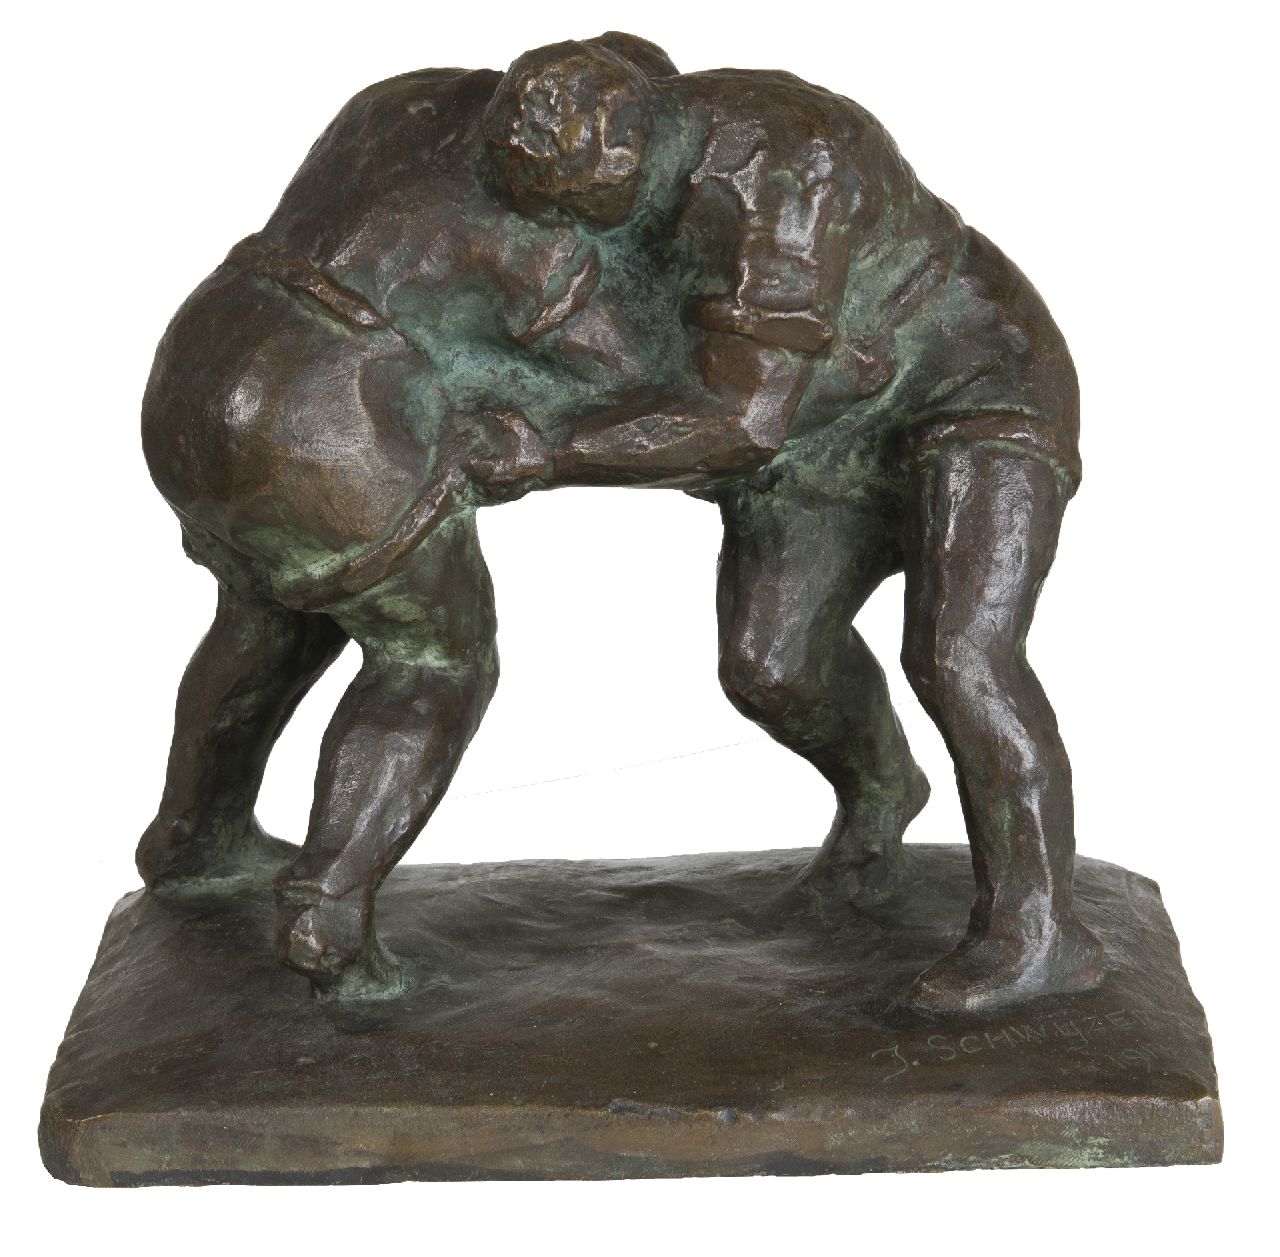 Schwyzer J.  | Julius Schwyzer | Sculptures and objects offered for sale | Wrestlers, bronze 23.0 x 25.0 cm, signed on the base and dated 1917